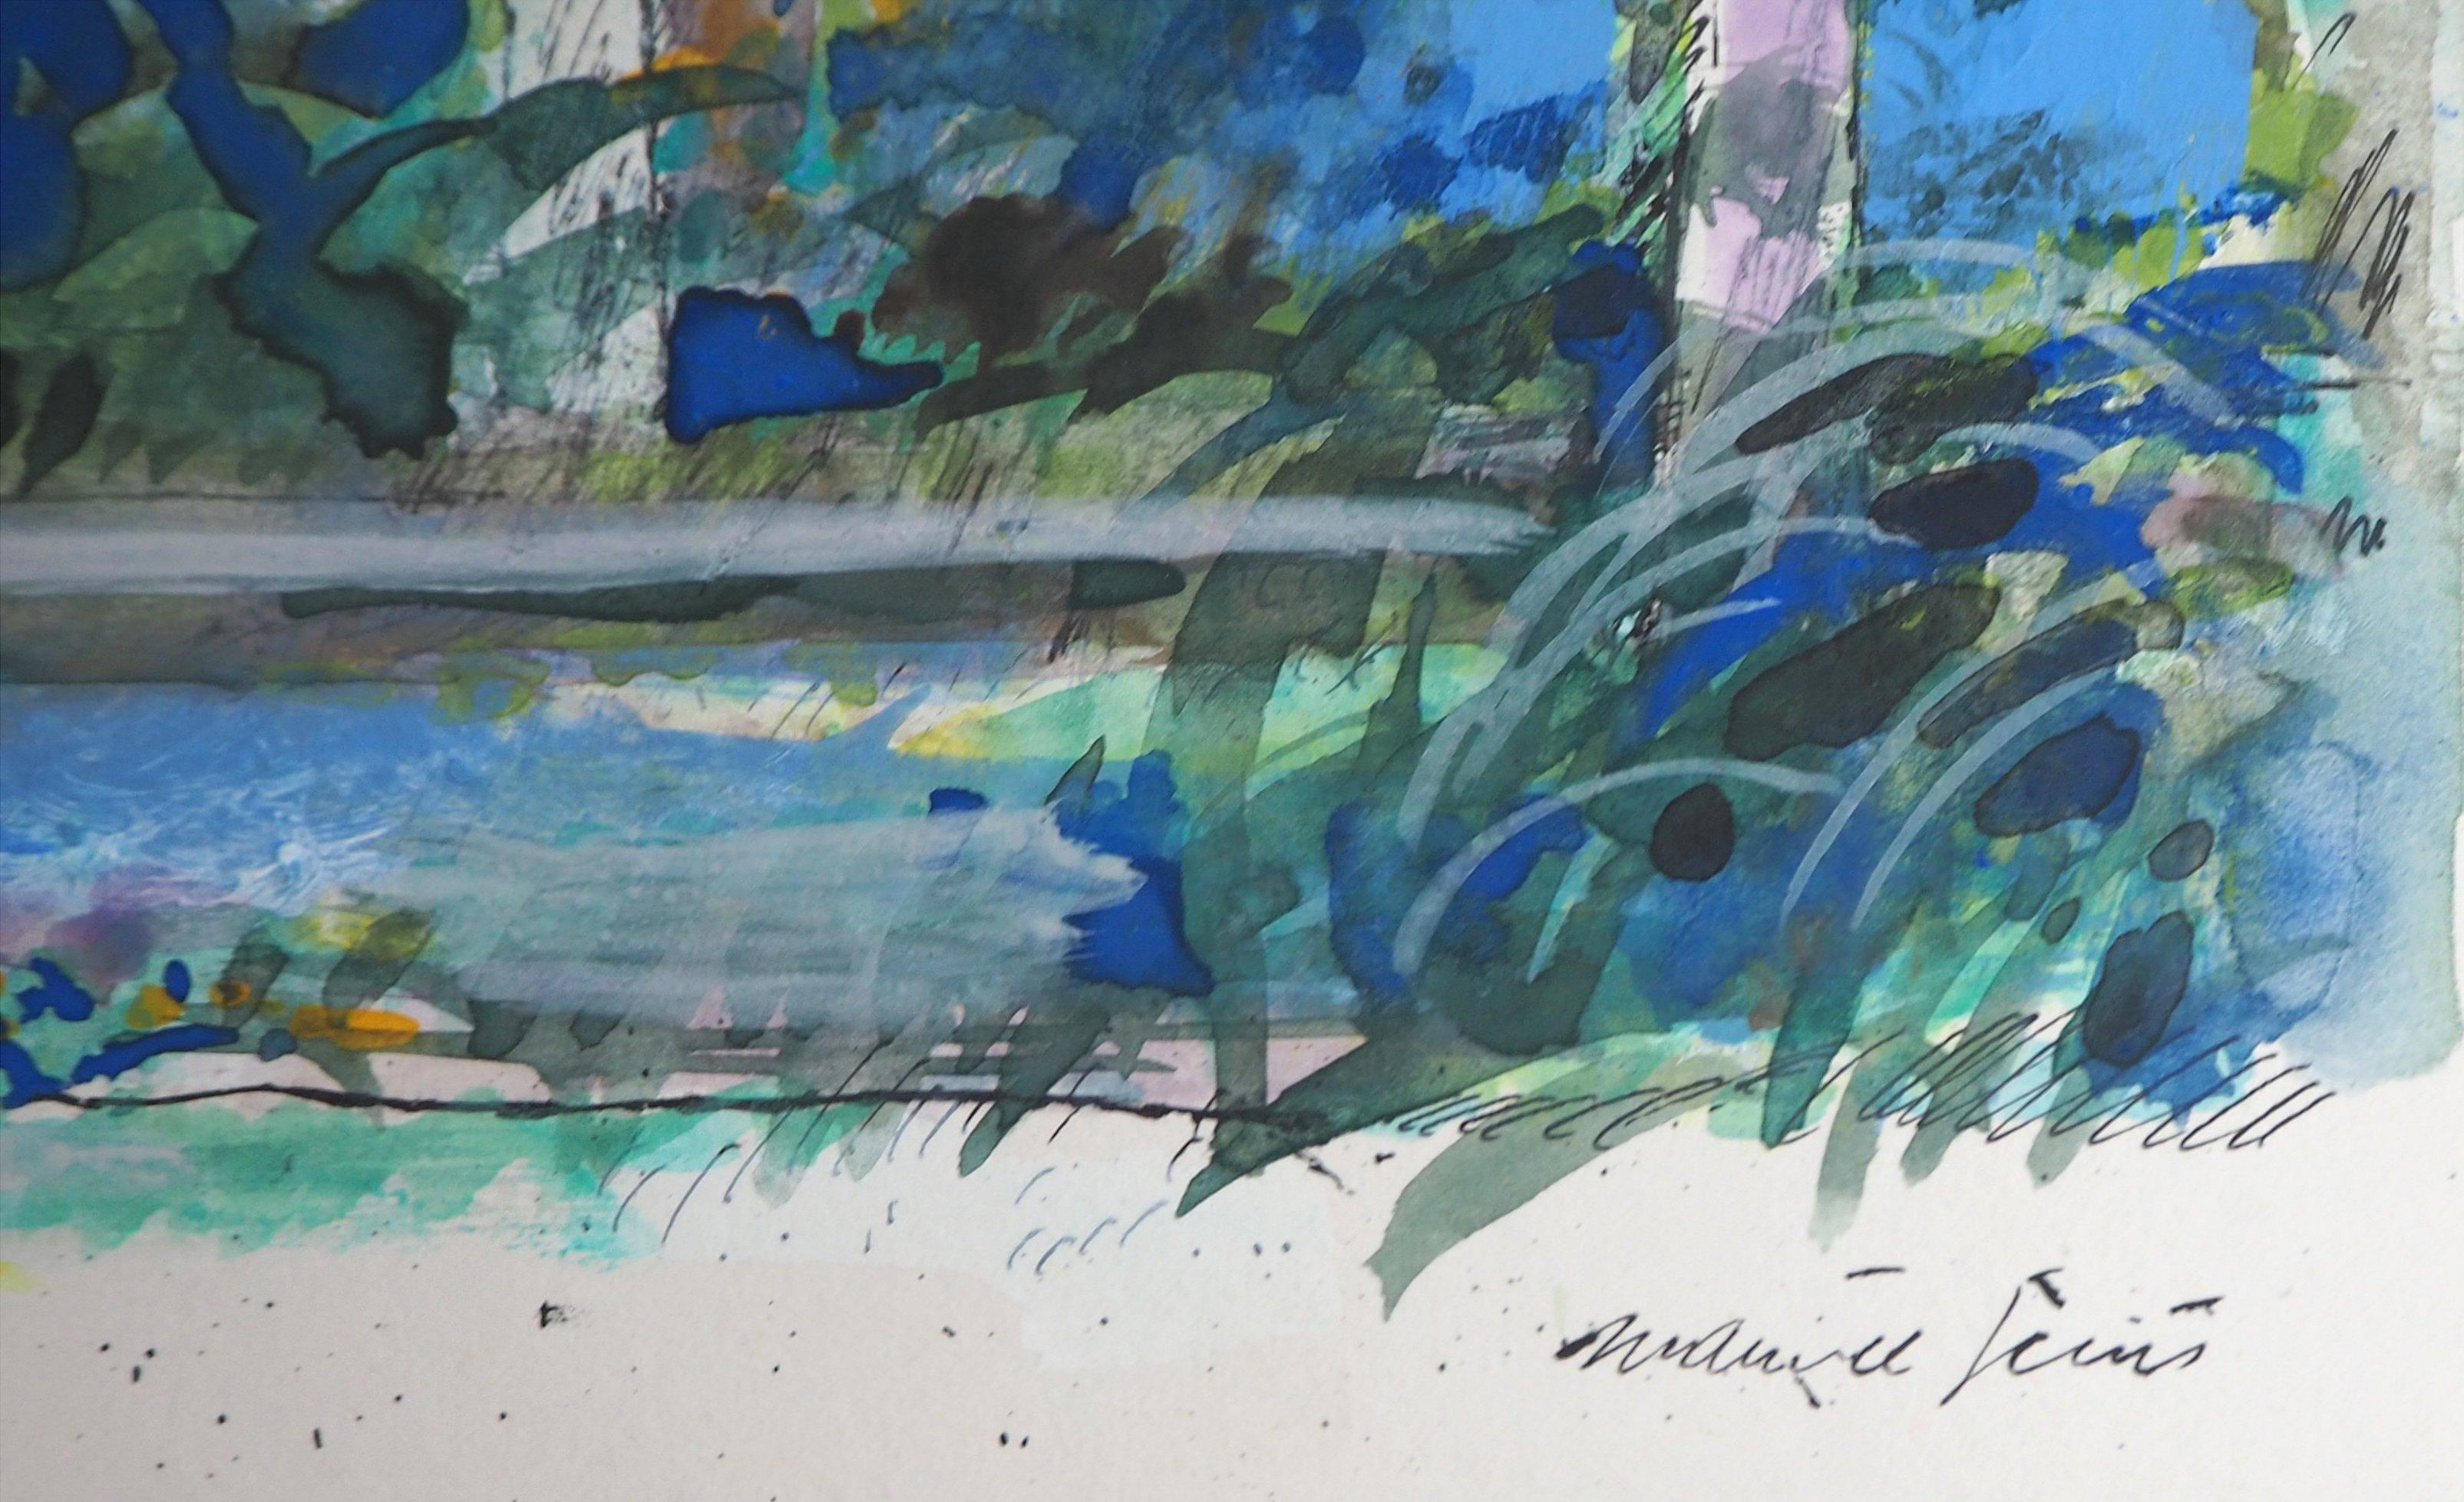 Tropical Dream - Original Handsigned Watercolor, Gouache and Ink Painting - Art by Maurice Genis